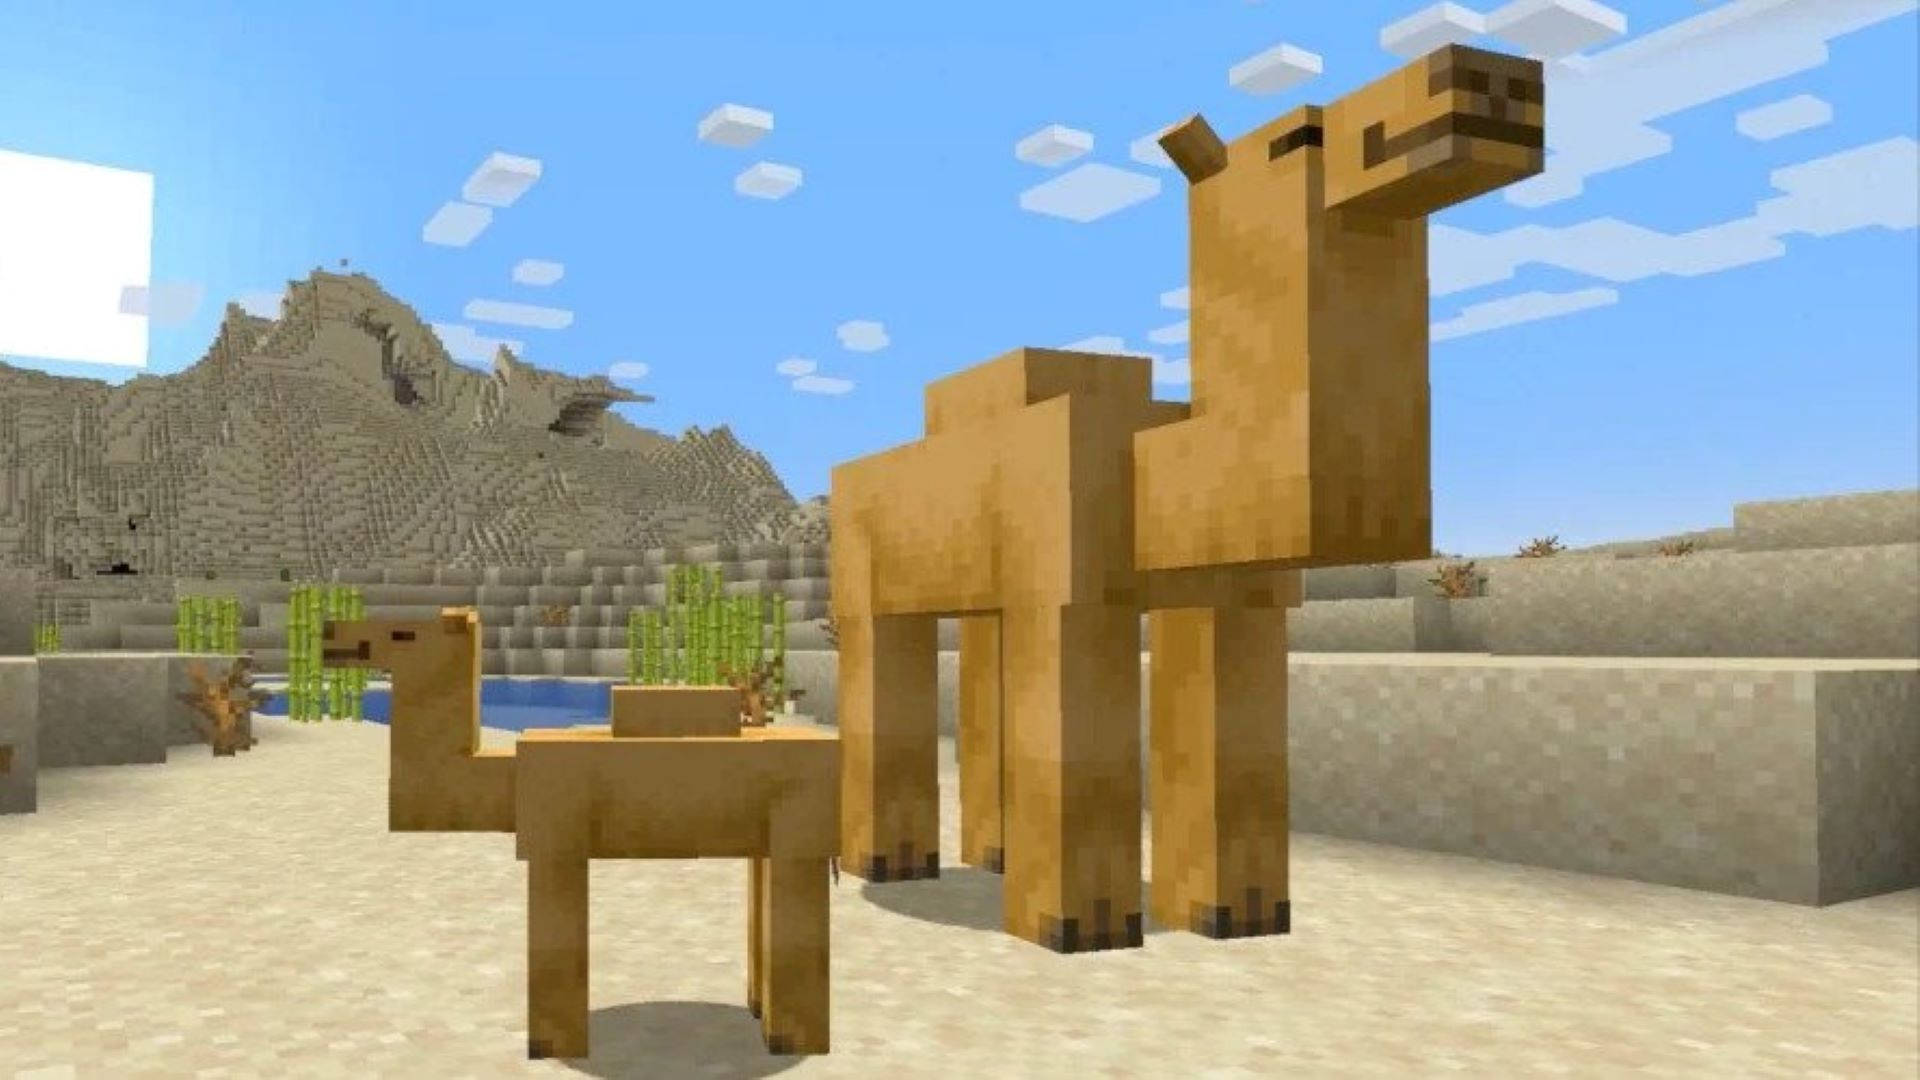 Camels In The Desert Minecraft Hd Wallpaper